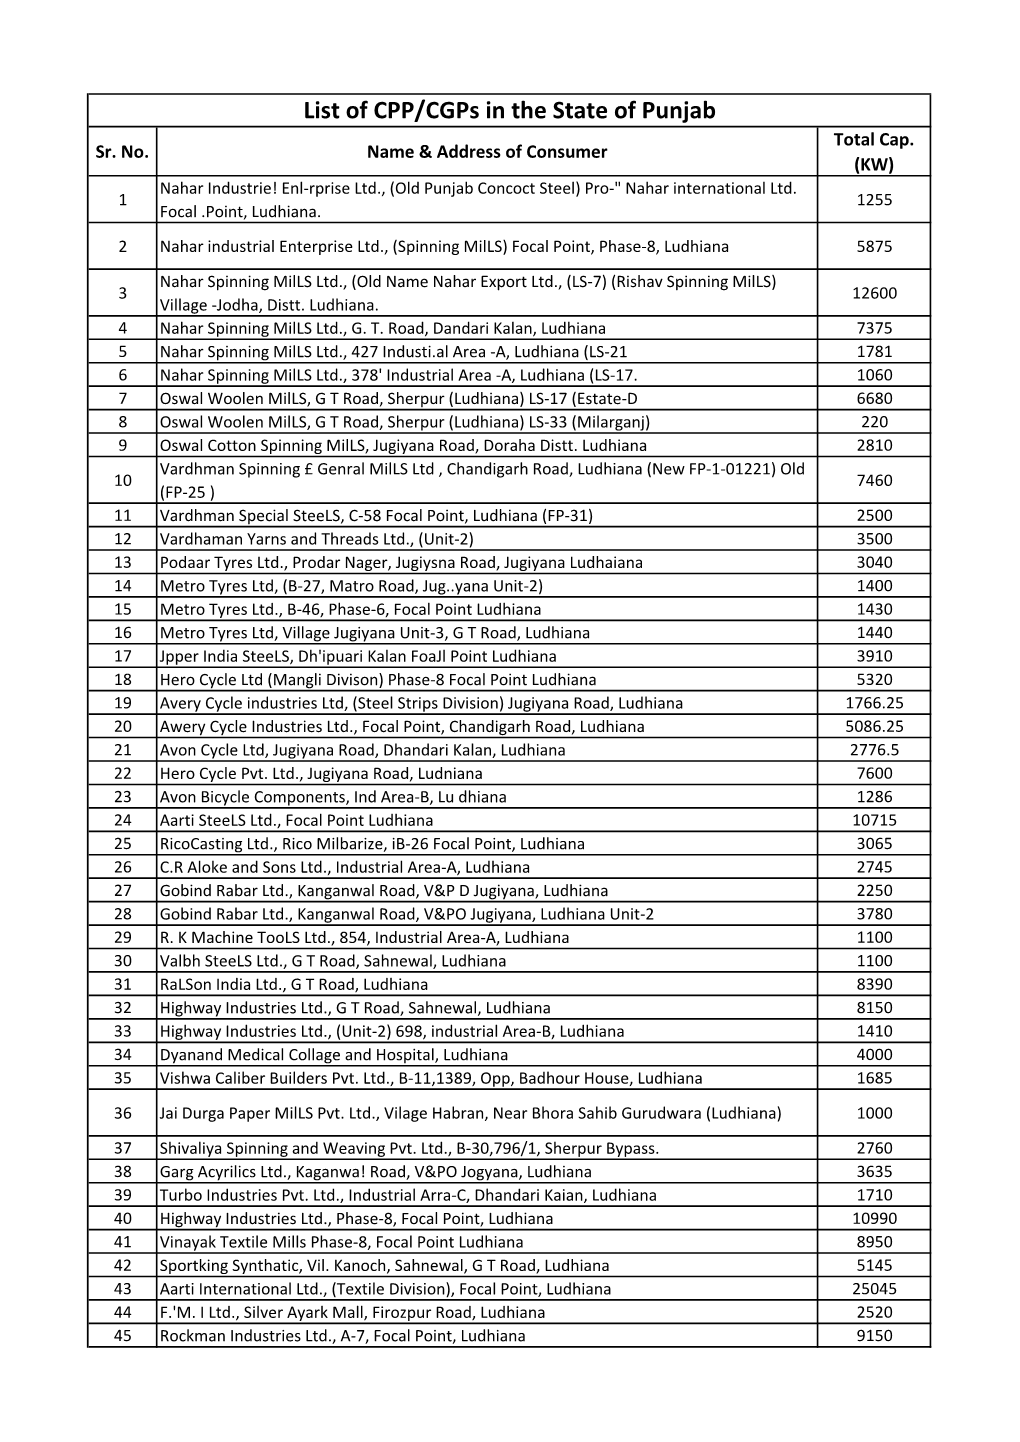 List of CPP/Cgps in the State of Punjab Total Cap